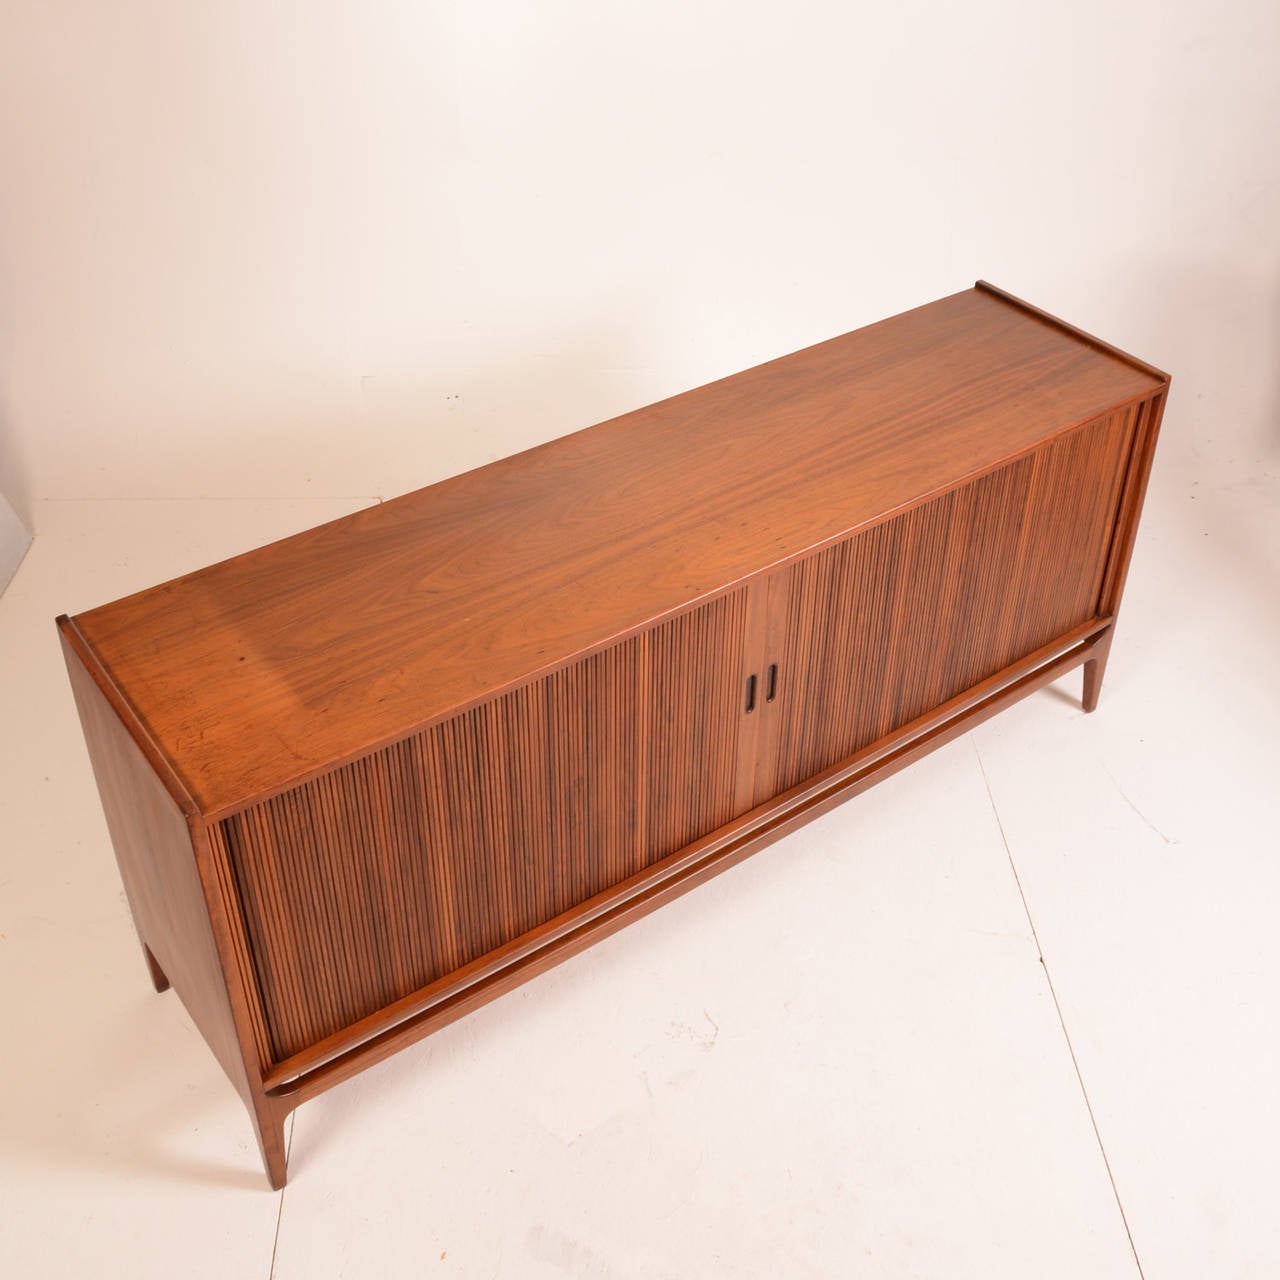 Tambour doored walnut credenza designed by Richard Thompson for Glenn of California. This is a great piece of California Modern. Made from beautifully selected walnut. Comes with the original drawer not pictured in the profile photos but shown in